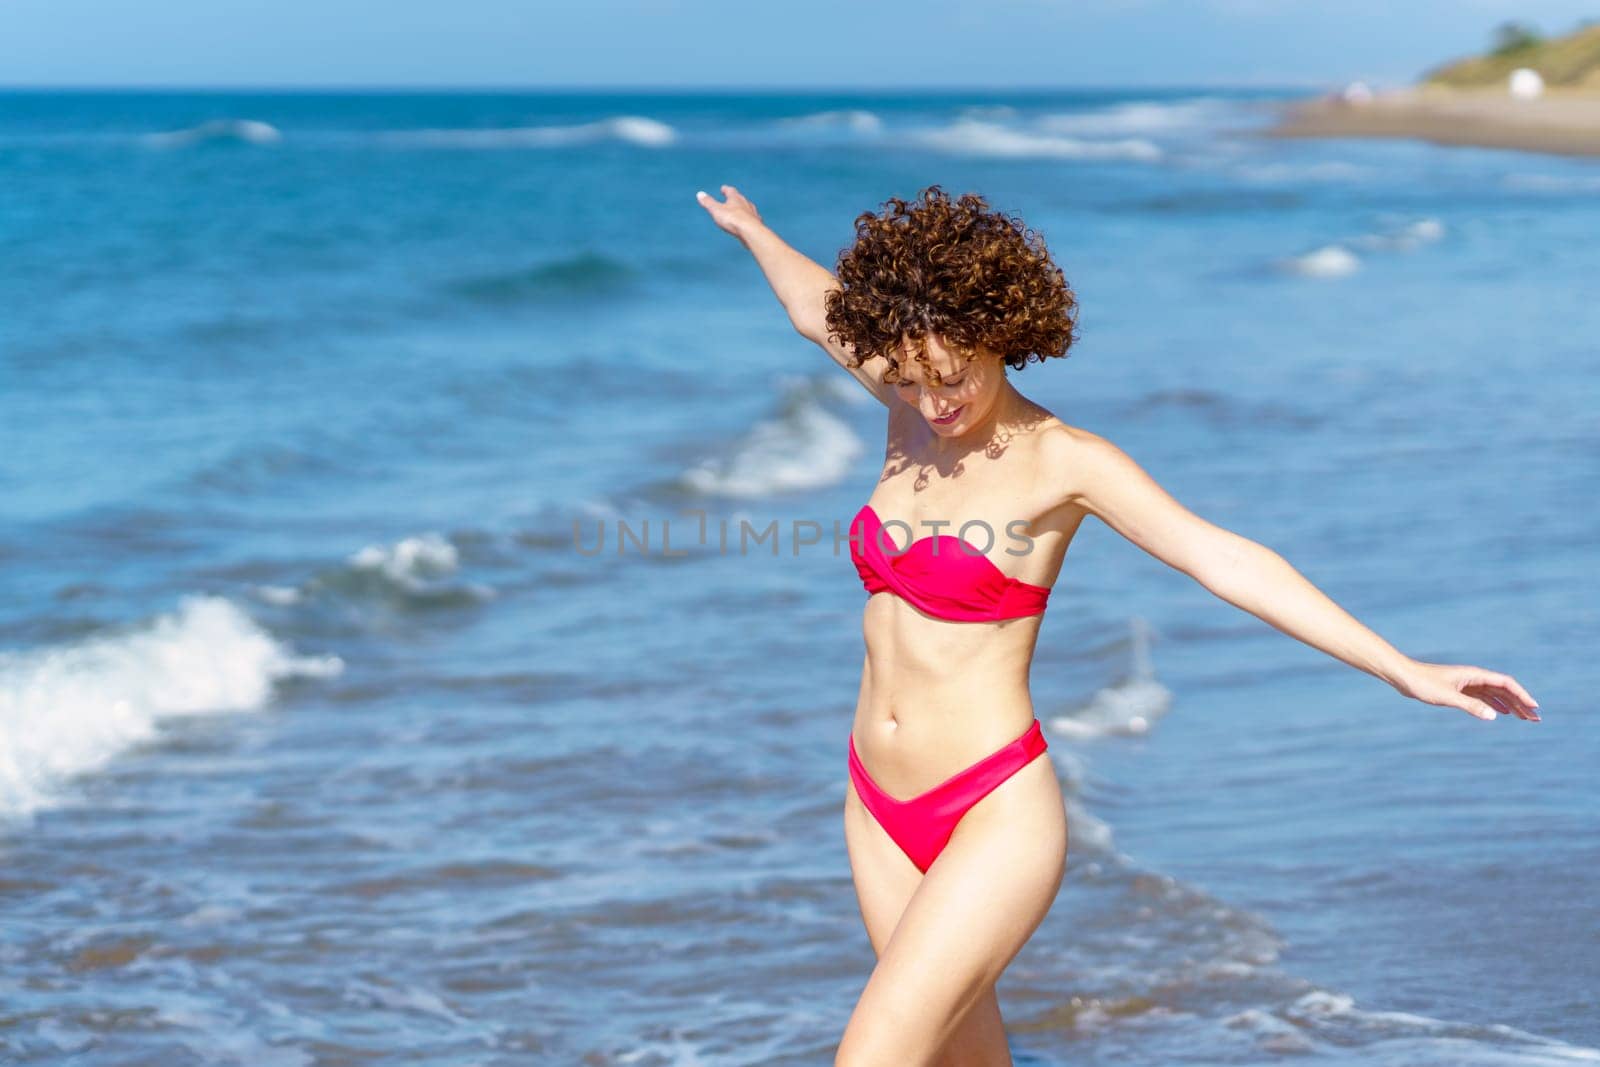 Joyful young lady in swimwear walking in sea with outstretched arms by javiindy